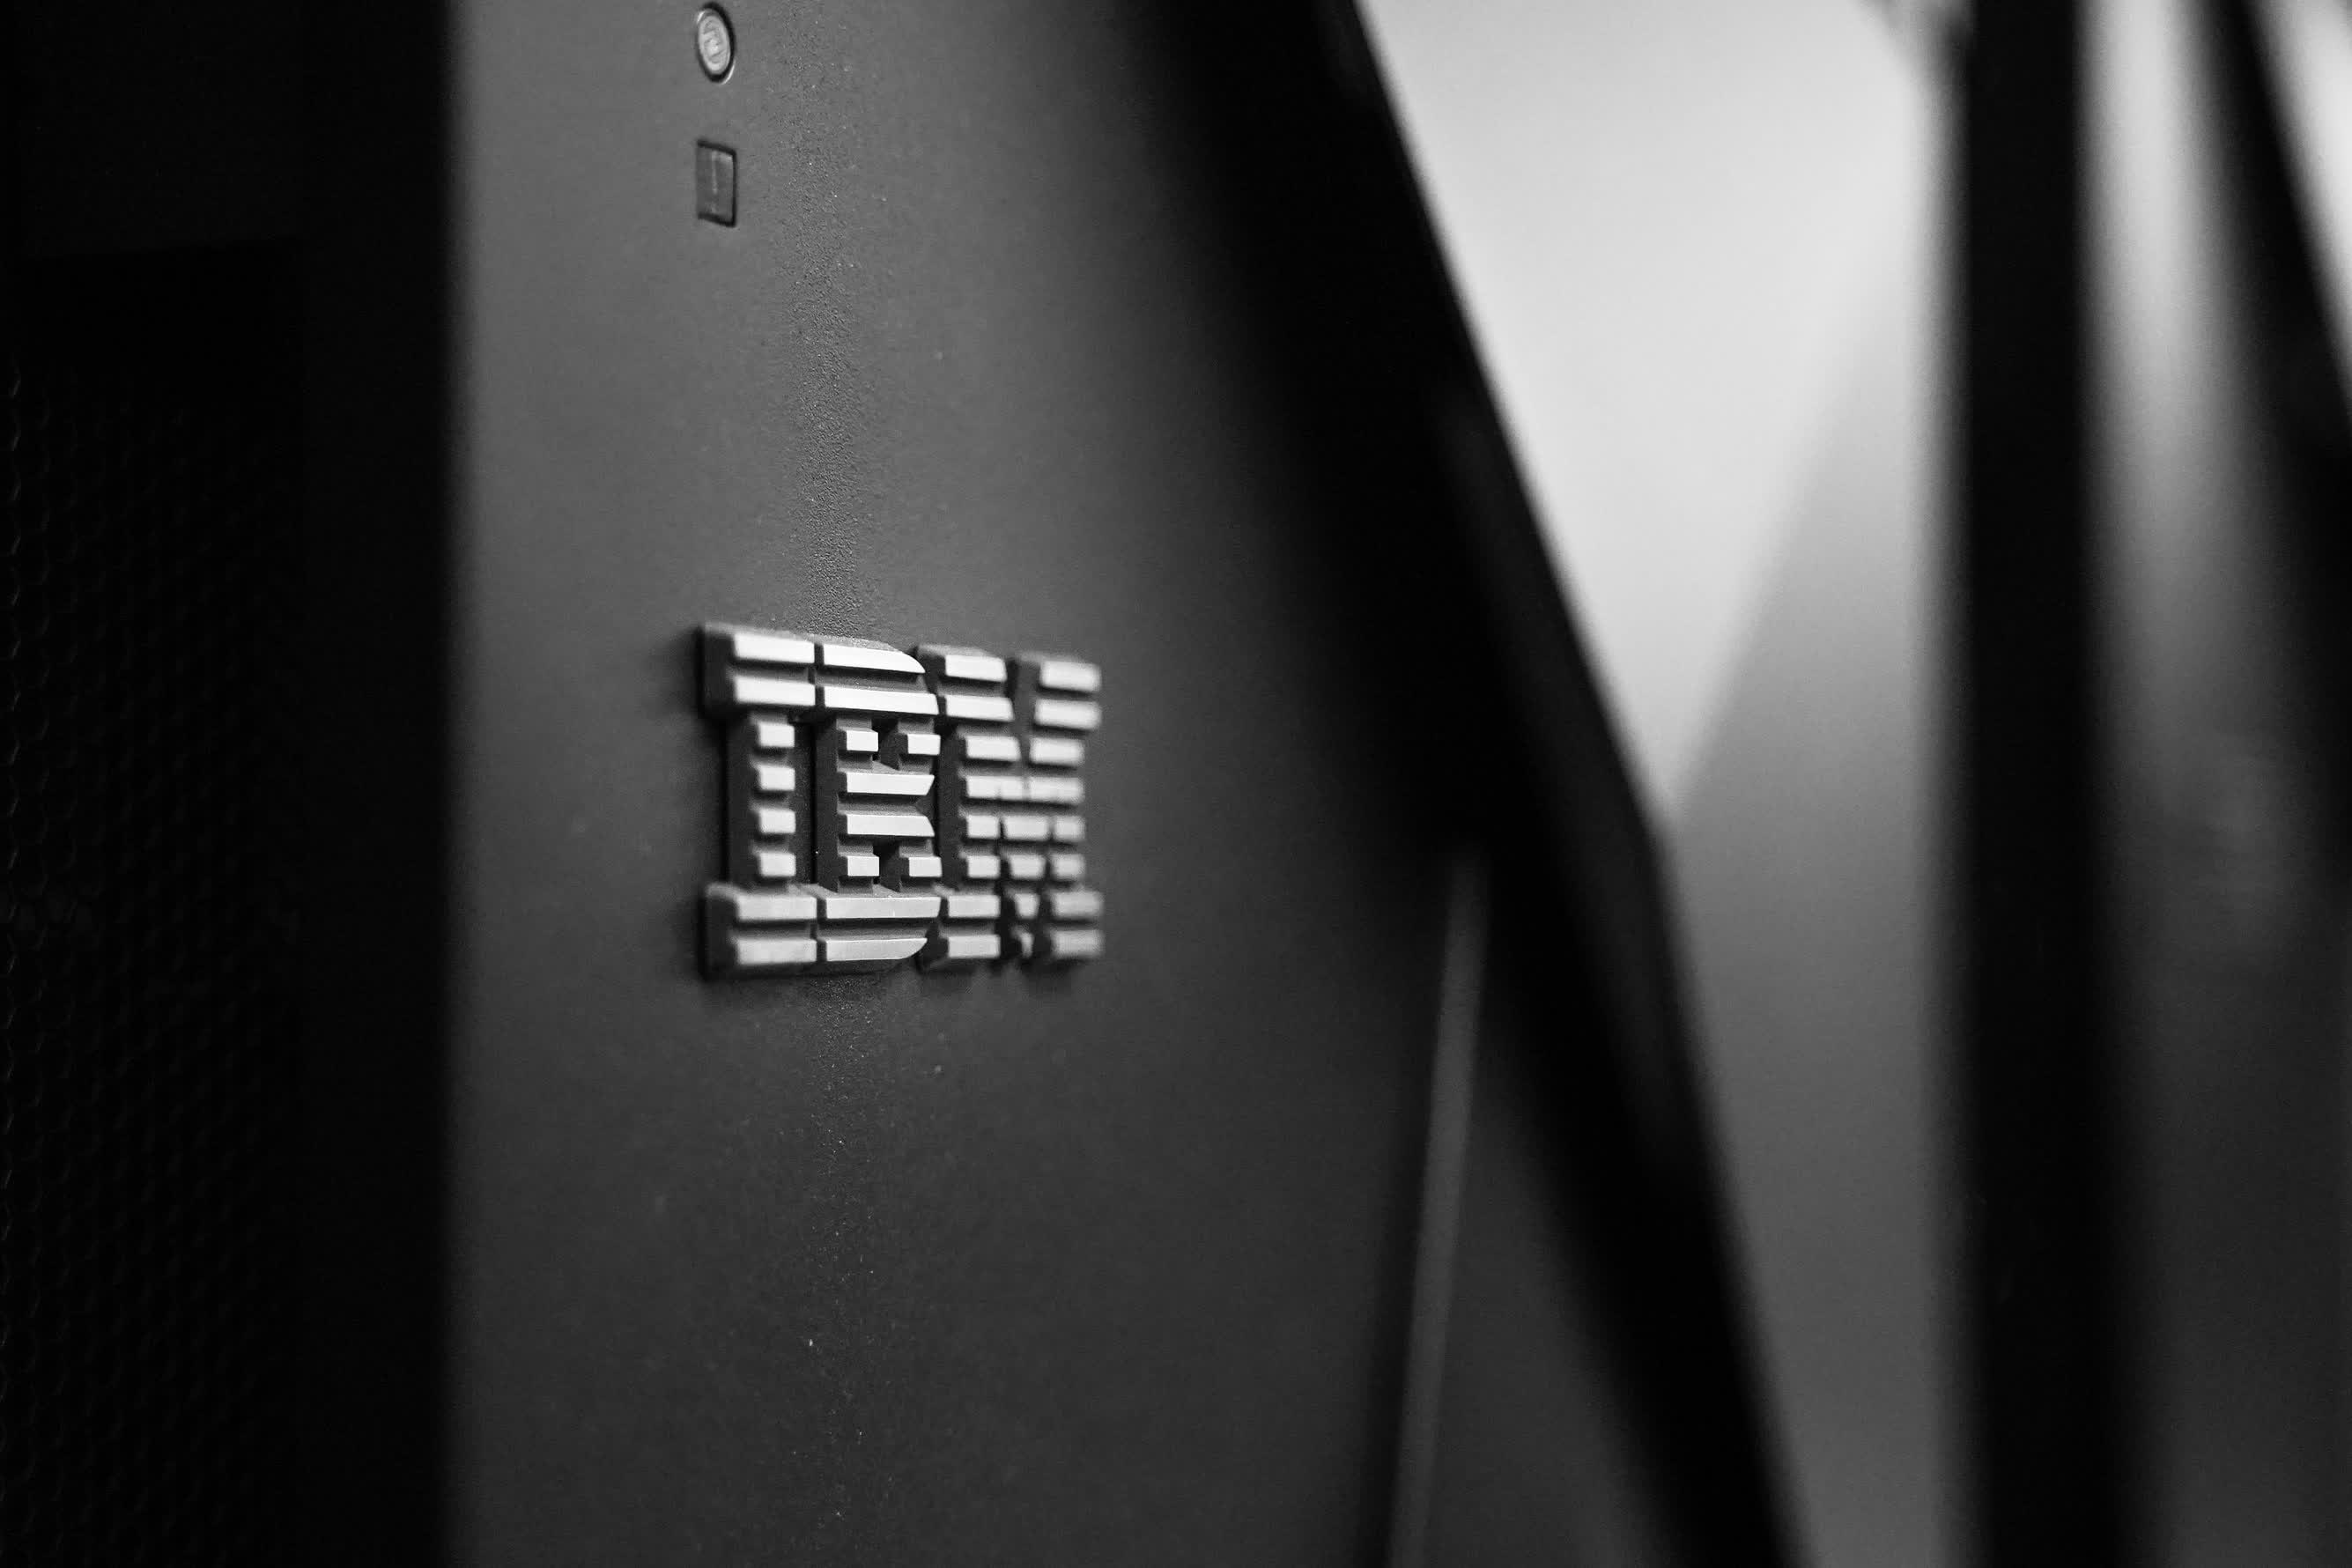 IBM will stop hiring for jobs that could be performed by an AI